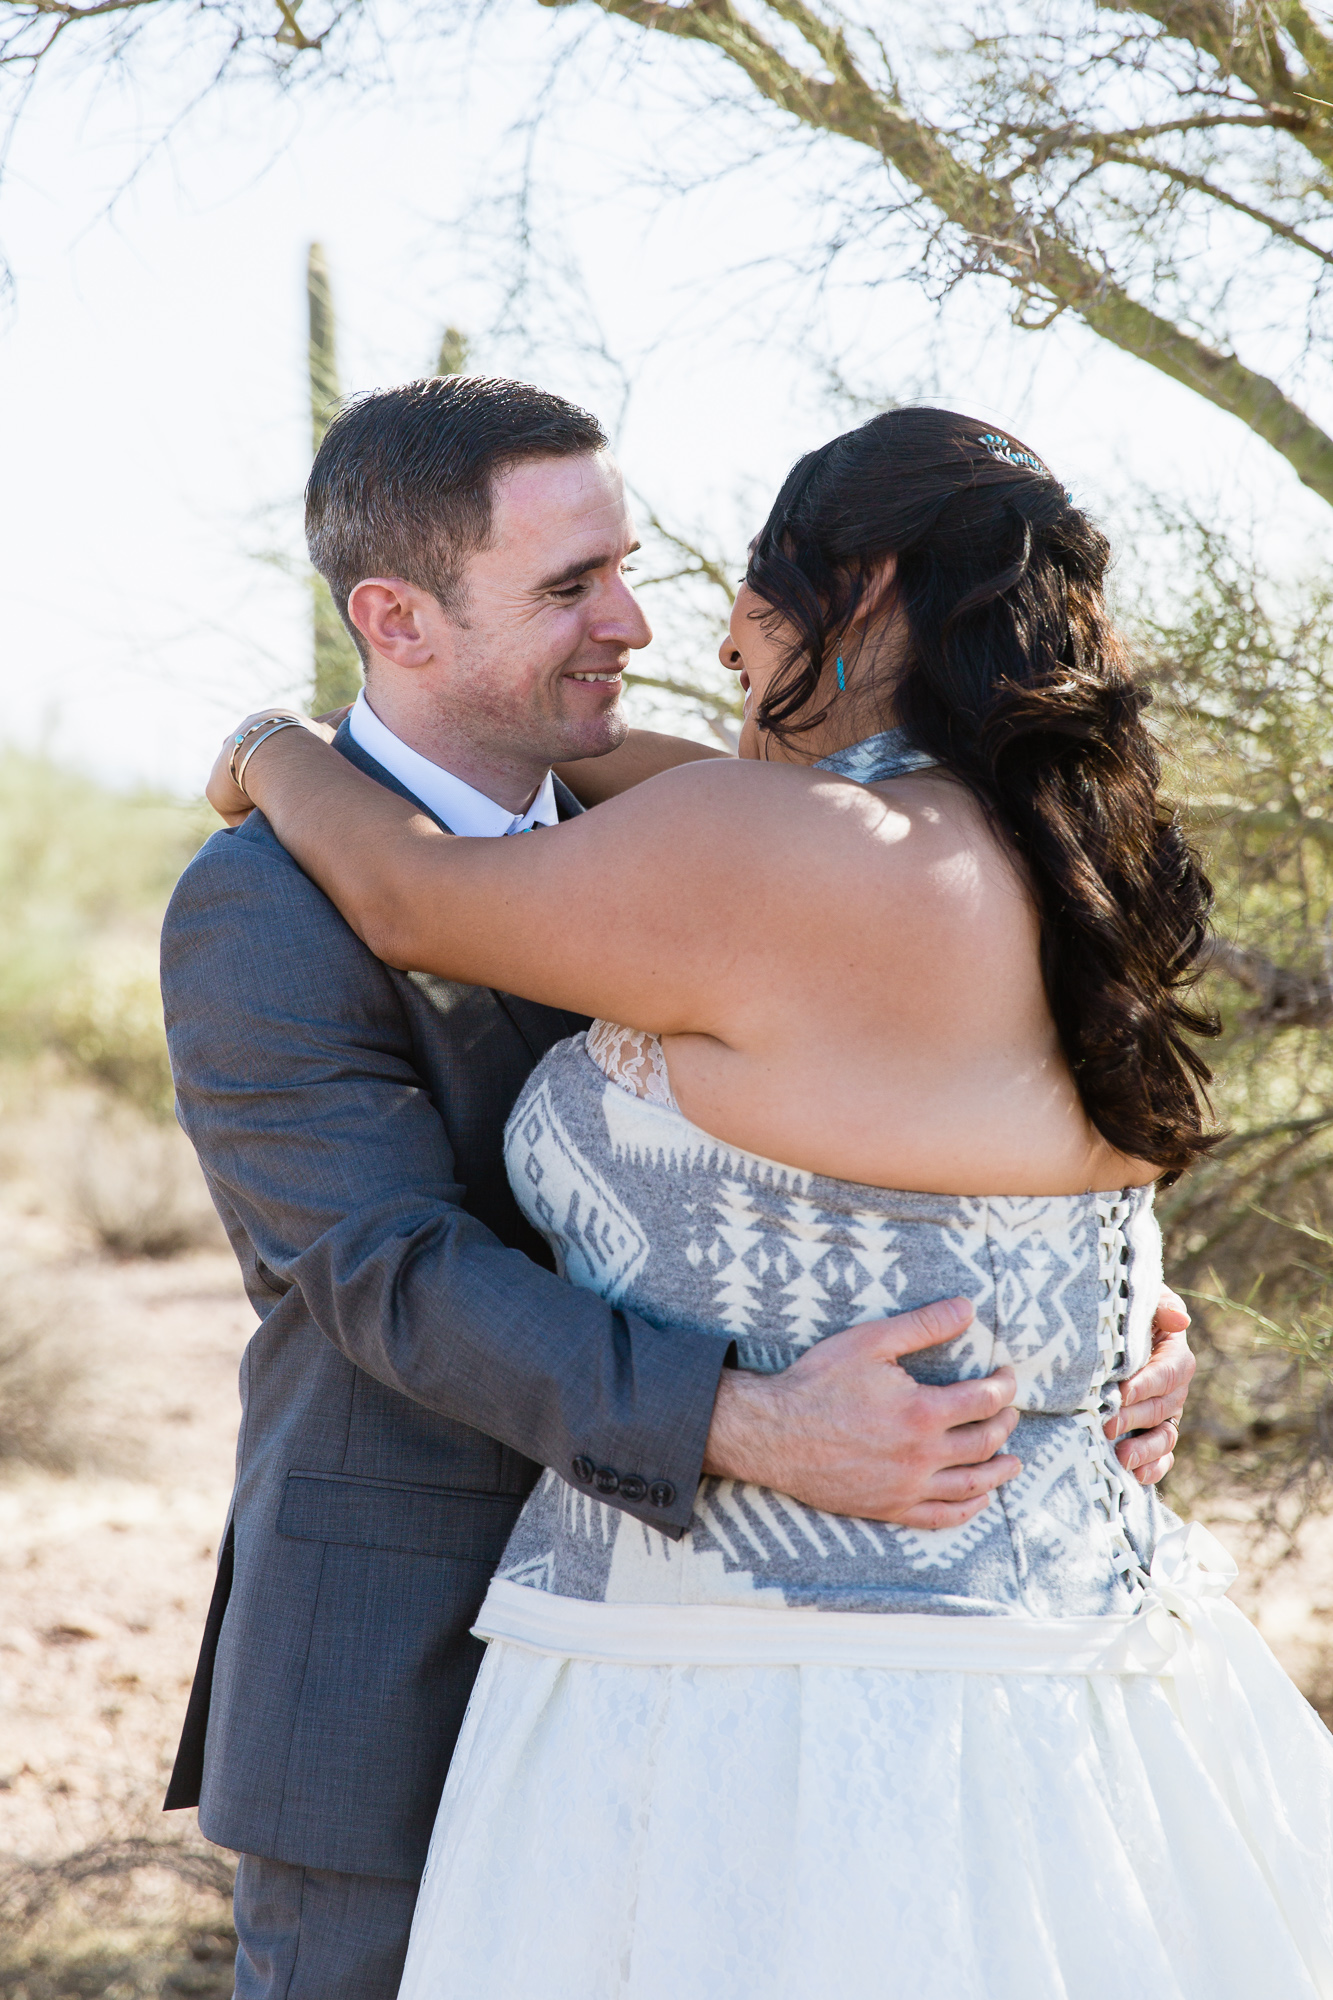 Bride and groom at their Lost Dutchman State Park wedding by Arizona wedding photographers PMA Photography.